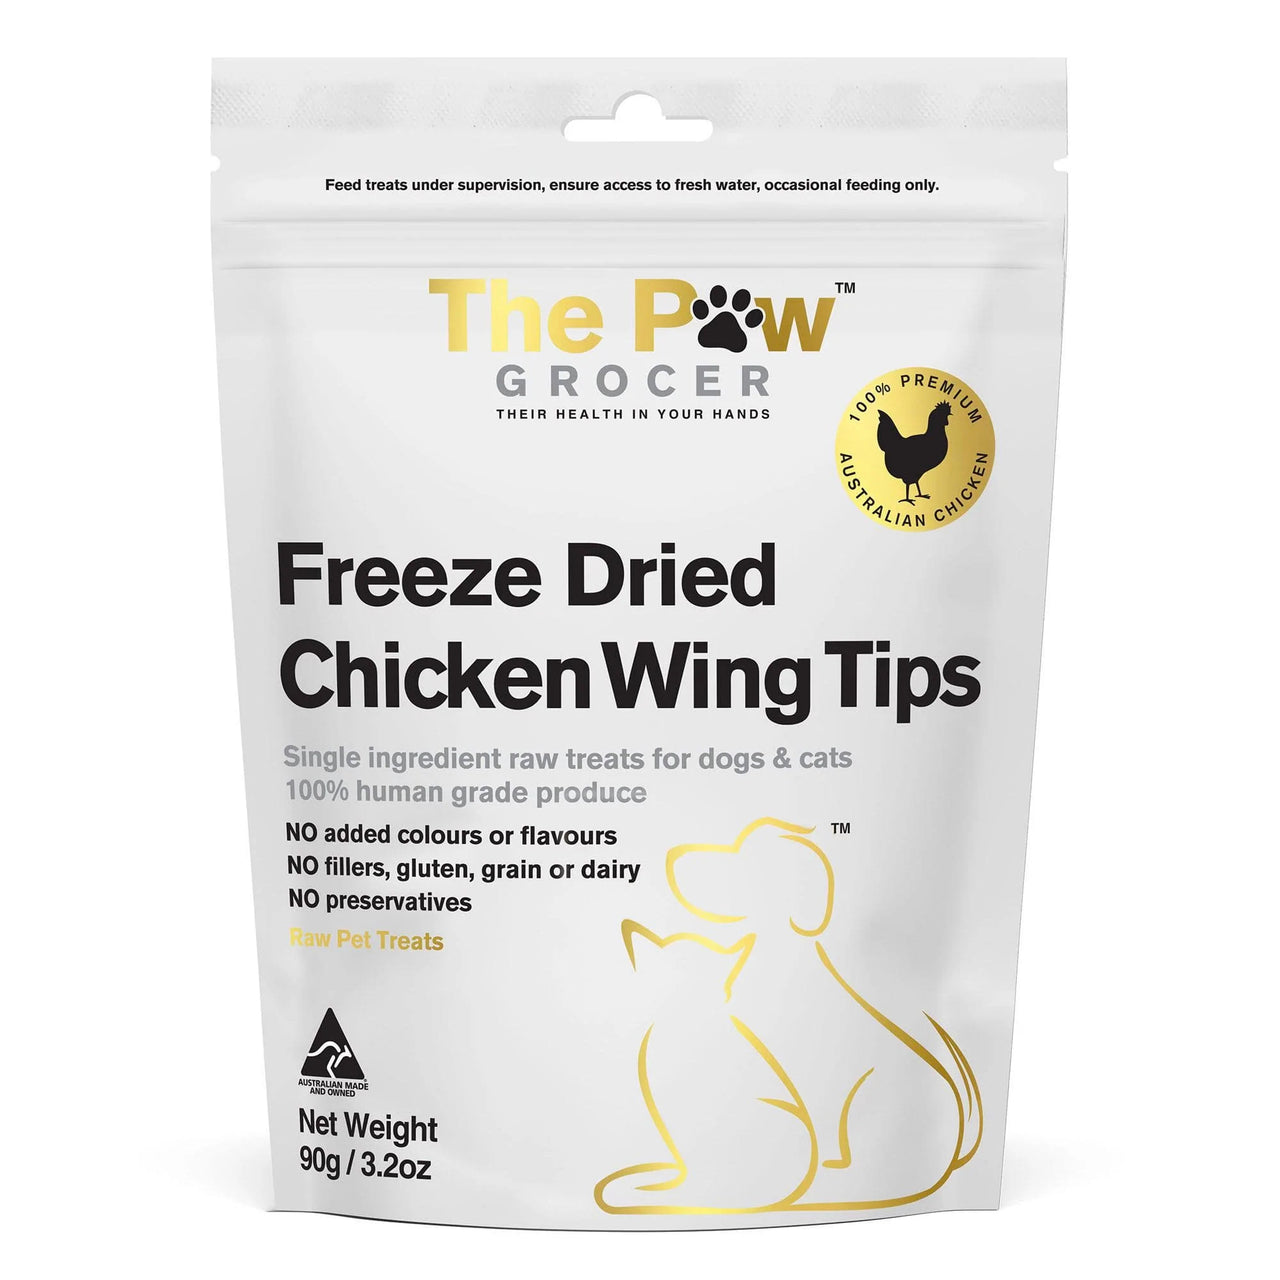 Freeze Dried Chicken Wing Tips